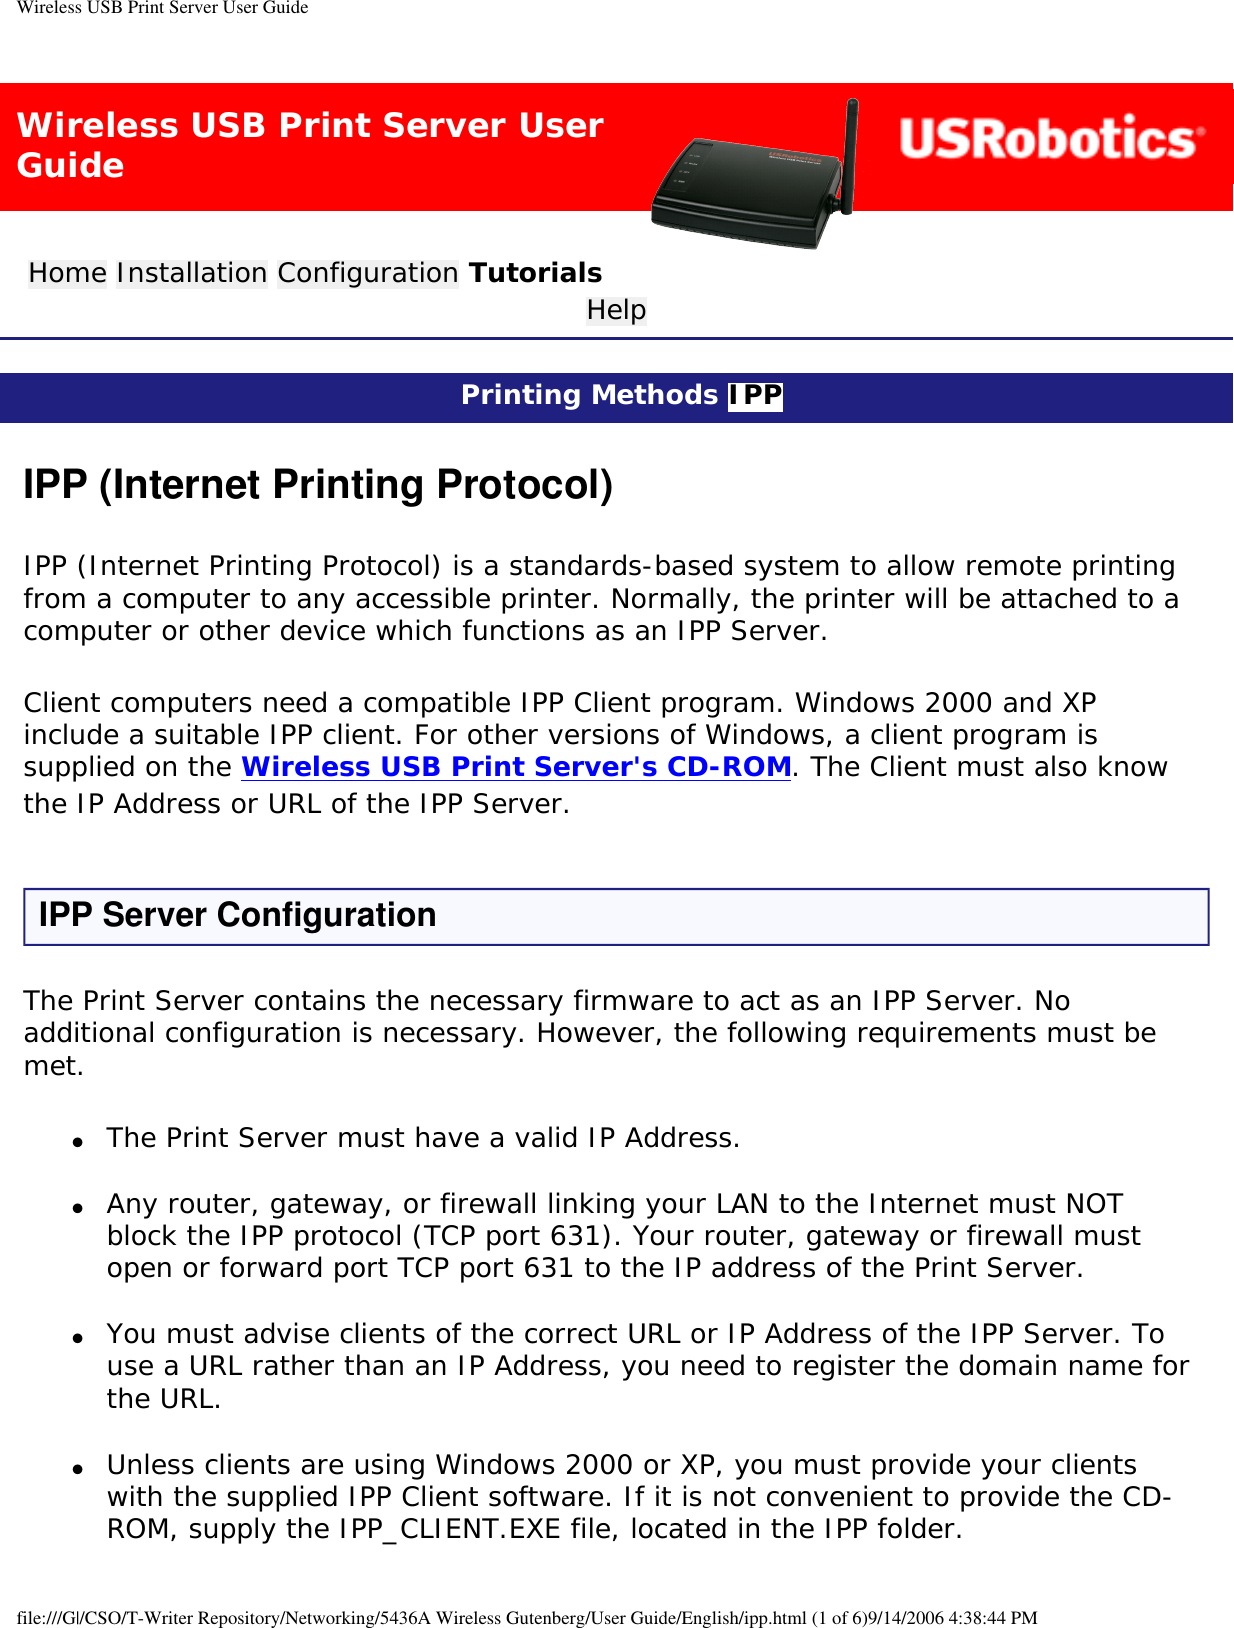 Wireless USB Print Server User GuideWireless USB Print Server User GuideHome Installation Configuration Tutorials Help Printing Methods IPP IPP (Internet Printing Protocol)IPP (Internet Printing Protocol) is a standards-based system to allow remote printing from a computer to any accessible printer. Normally, the printer will be attached to a computer or other device which functions as an IPP Server.Client computers need a compatible IPP Client program. Windows 2000 and XP include a suitable IPP client. For other versions of Windows, a client program is supplied on the Wireless USB Print Server&apos;s CD-ROM. The Client must also know the IP Address or URL of the IPP Server.IPP Server ConfigurationThe Print Server contains the necessary firmware to act as an IPP Server. No additional configuration is necessary. However, the following requirements must be met.●     The Print Server must have a valid IP Address. ●     Any router, gateway, or firewall linking your LAN to the Internet must NOT block the IPP protocol (TCP port 631). Your router, gateway or firewall must open or forward port TCP port 631 to the IP address of the Print Server. ●     You must advise clients of the correct URL or IP Address of the IPP Server. To use a URL rather than an IP Address, you need to register the domain name for the URL. ●     Unless clients are using Windows 2000 or XP, you must provide your clients with the supplied IPP Client software. If it is not convenient to provide the CD-ROM, supply the IPP_CLIENT.EXE file, located in the IPP folder. file:///G|/CSO/T-Writer Repository/Networking/5436A Wireless Gutenberg/User Guide/English/ipp.html (1 of 6)9/14/2006 4:38:44 PM